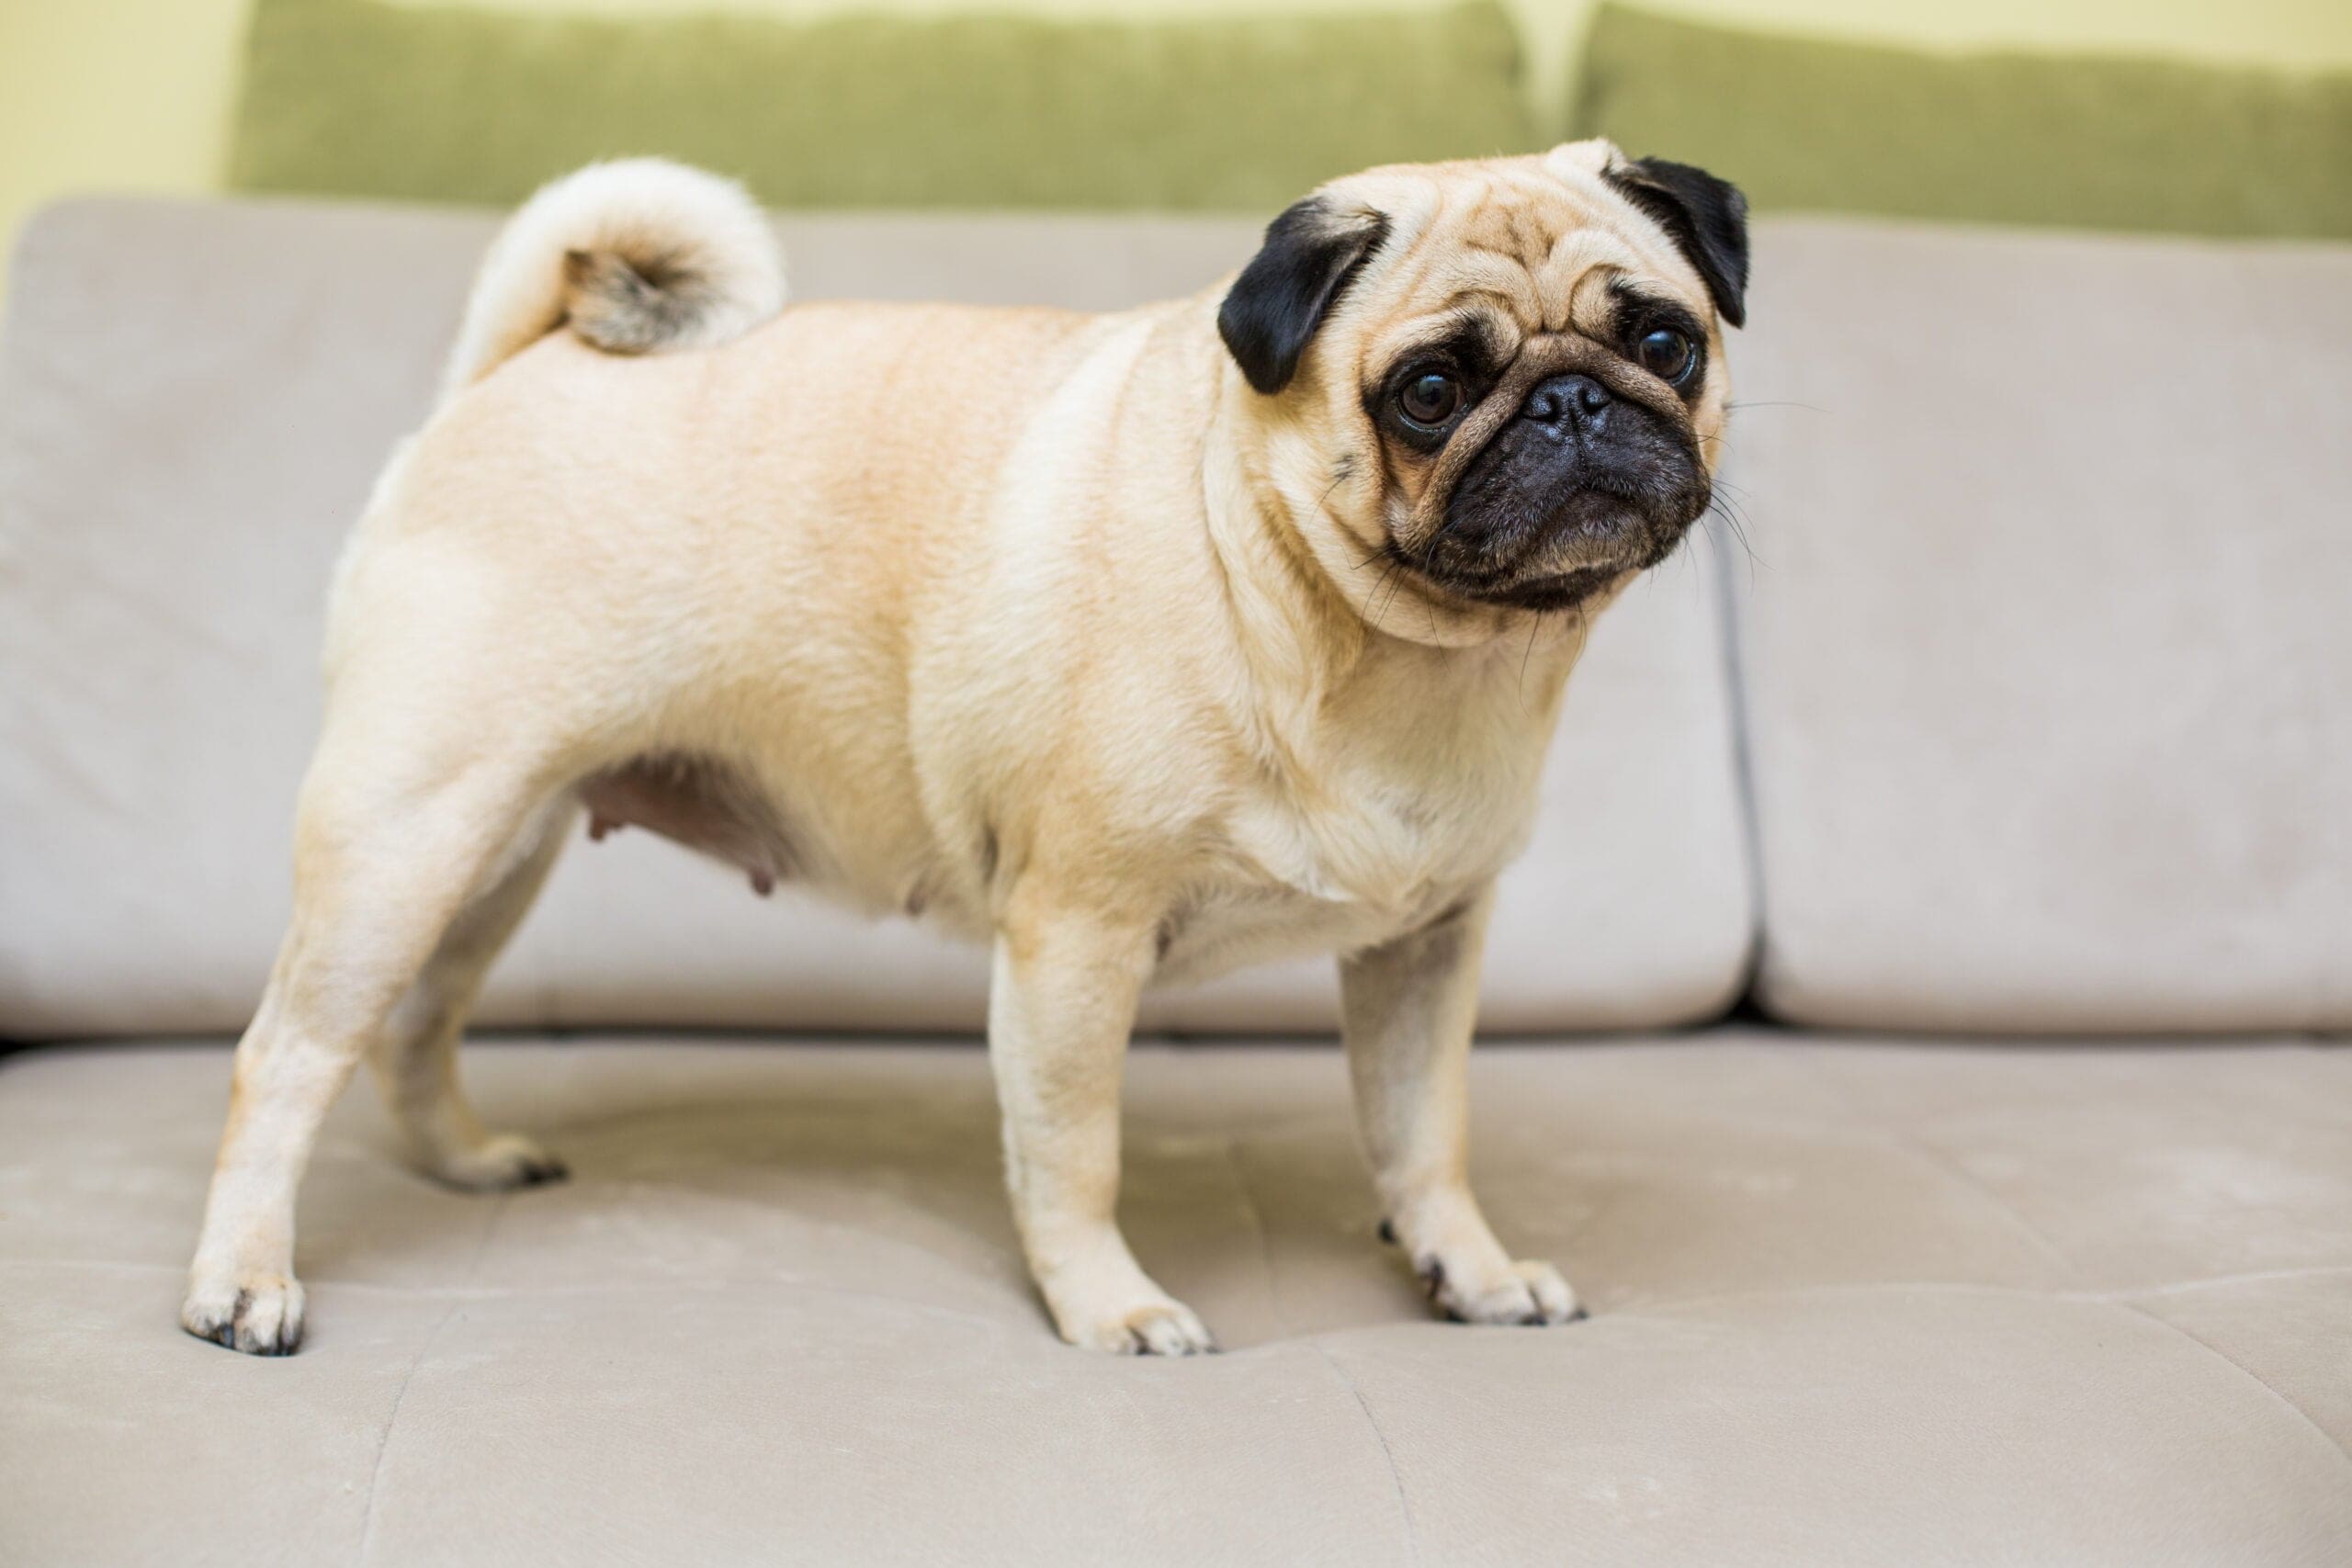 pug dog on couch in dog-friendly home